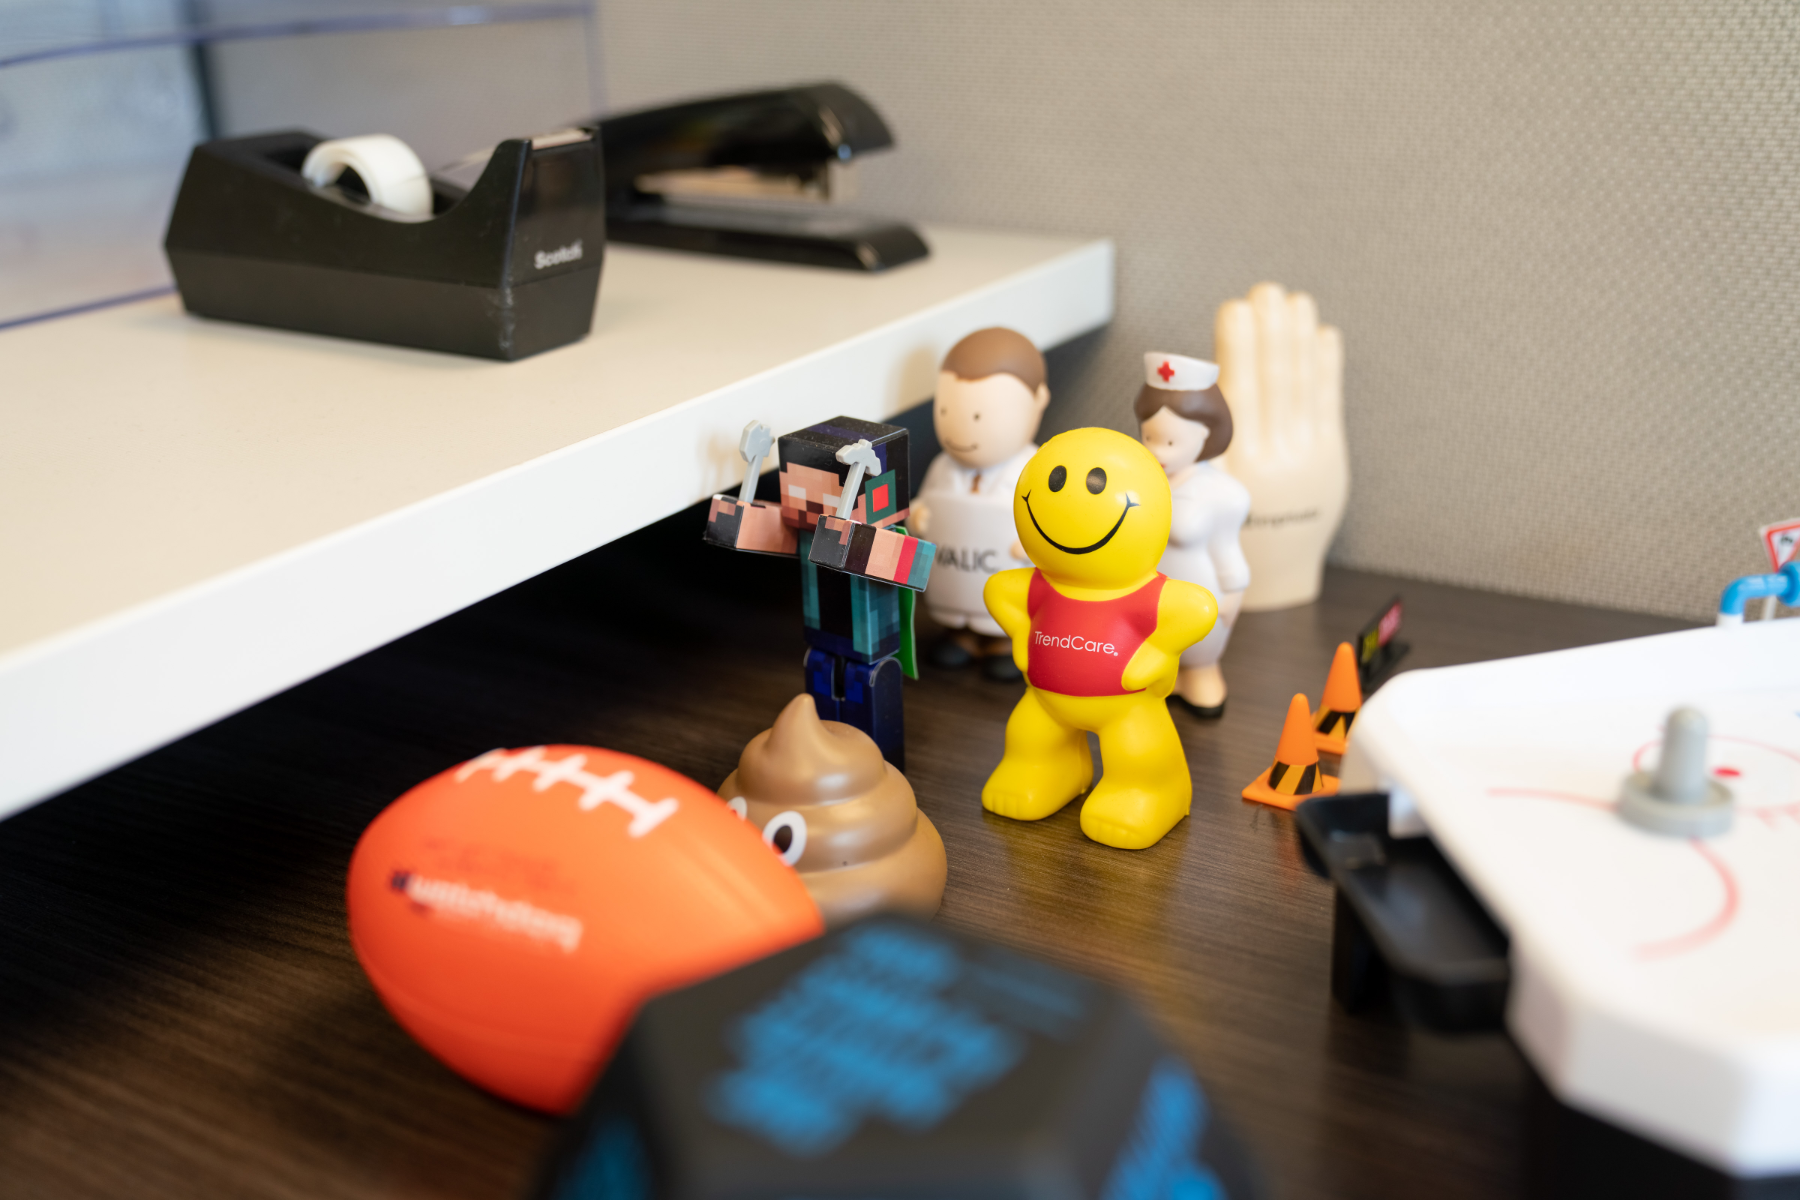 Image of a desk with toys on it